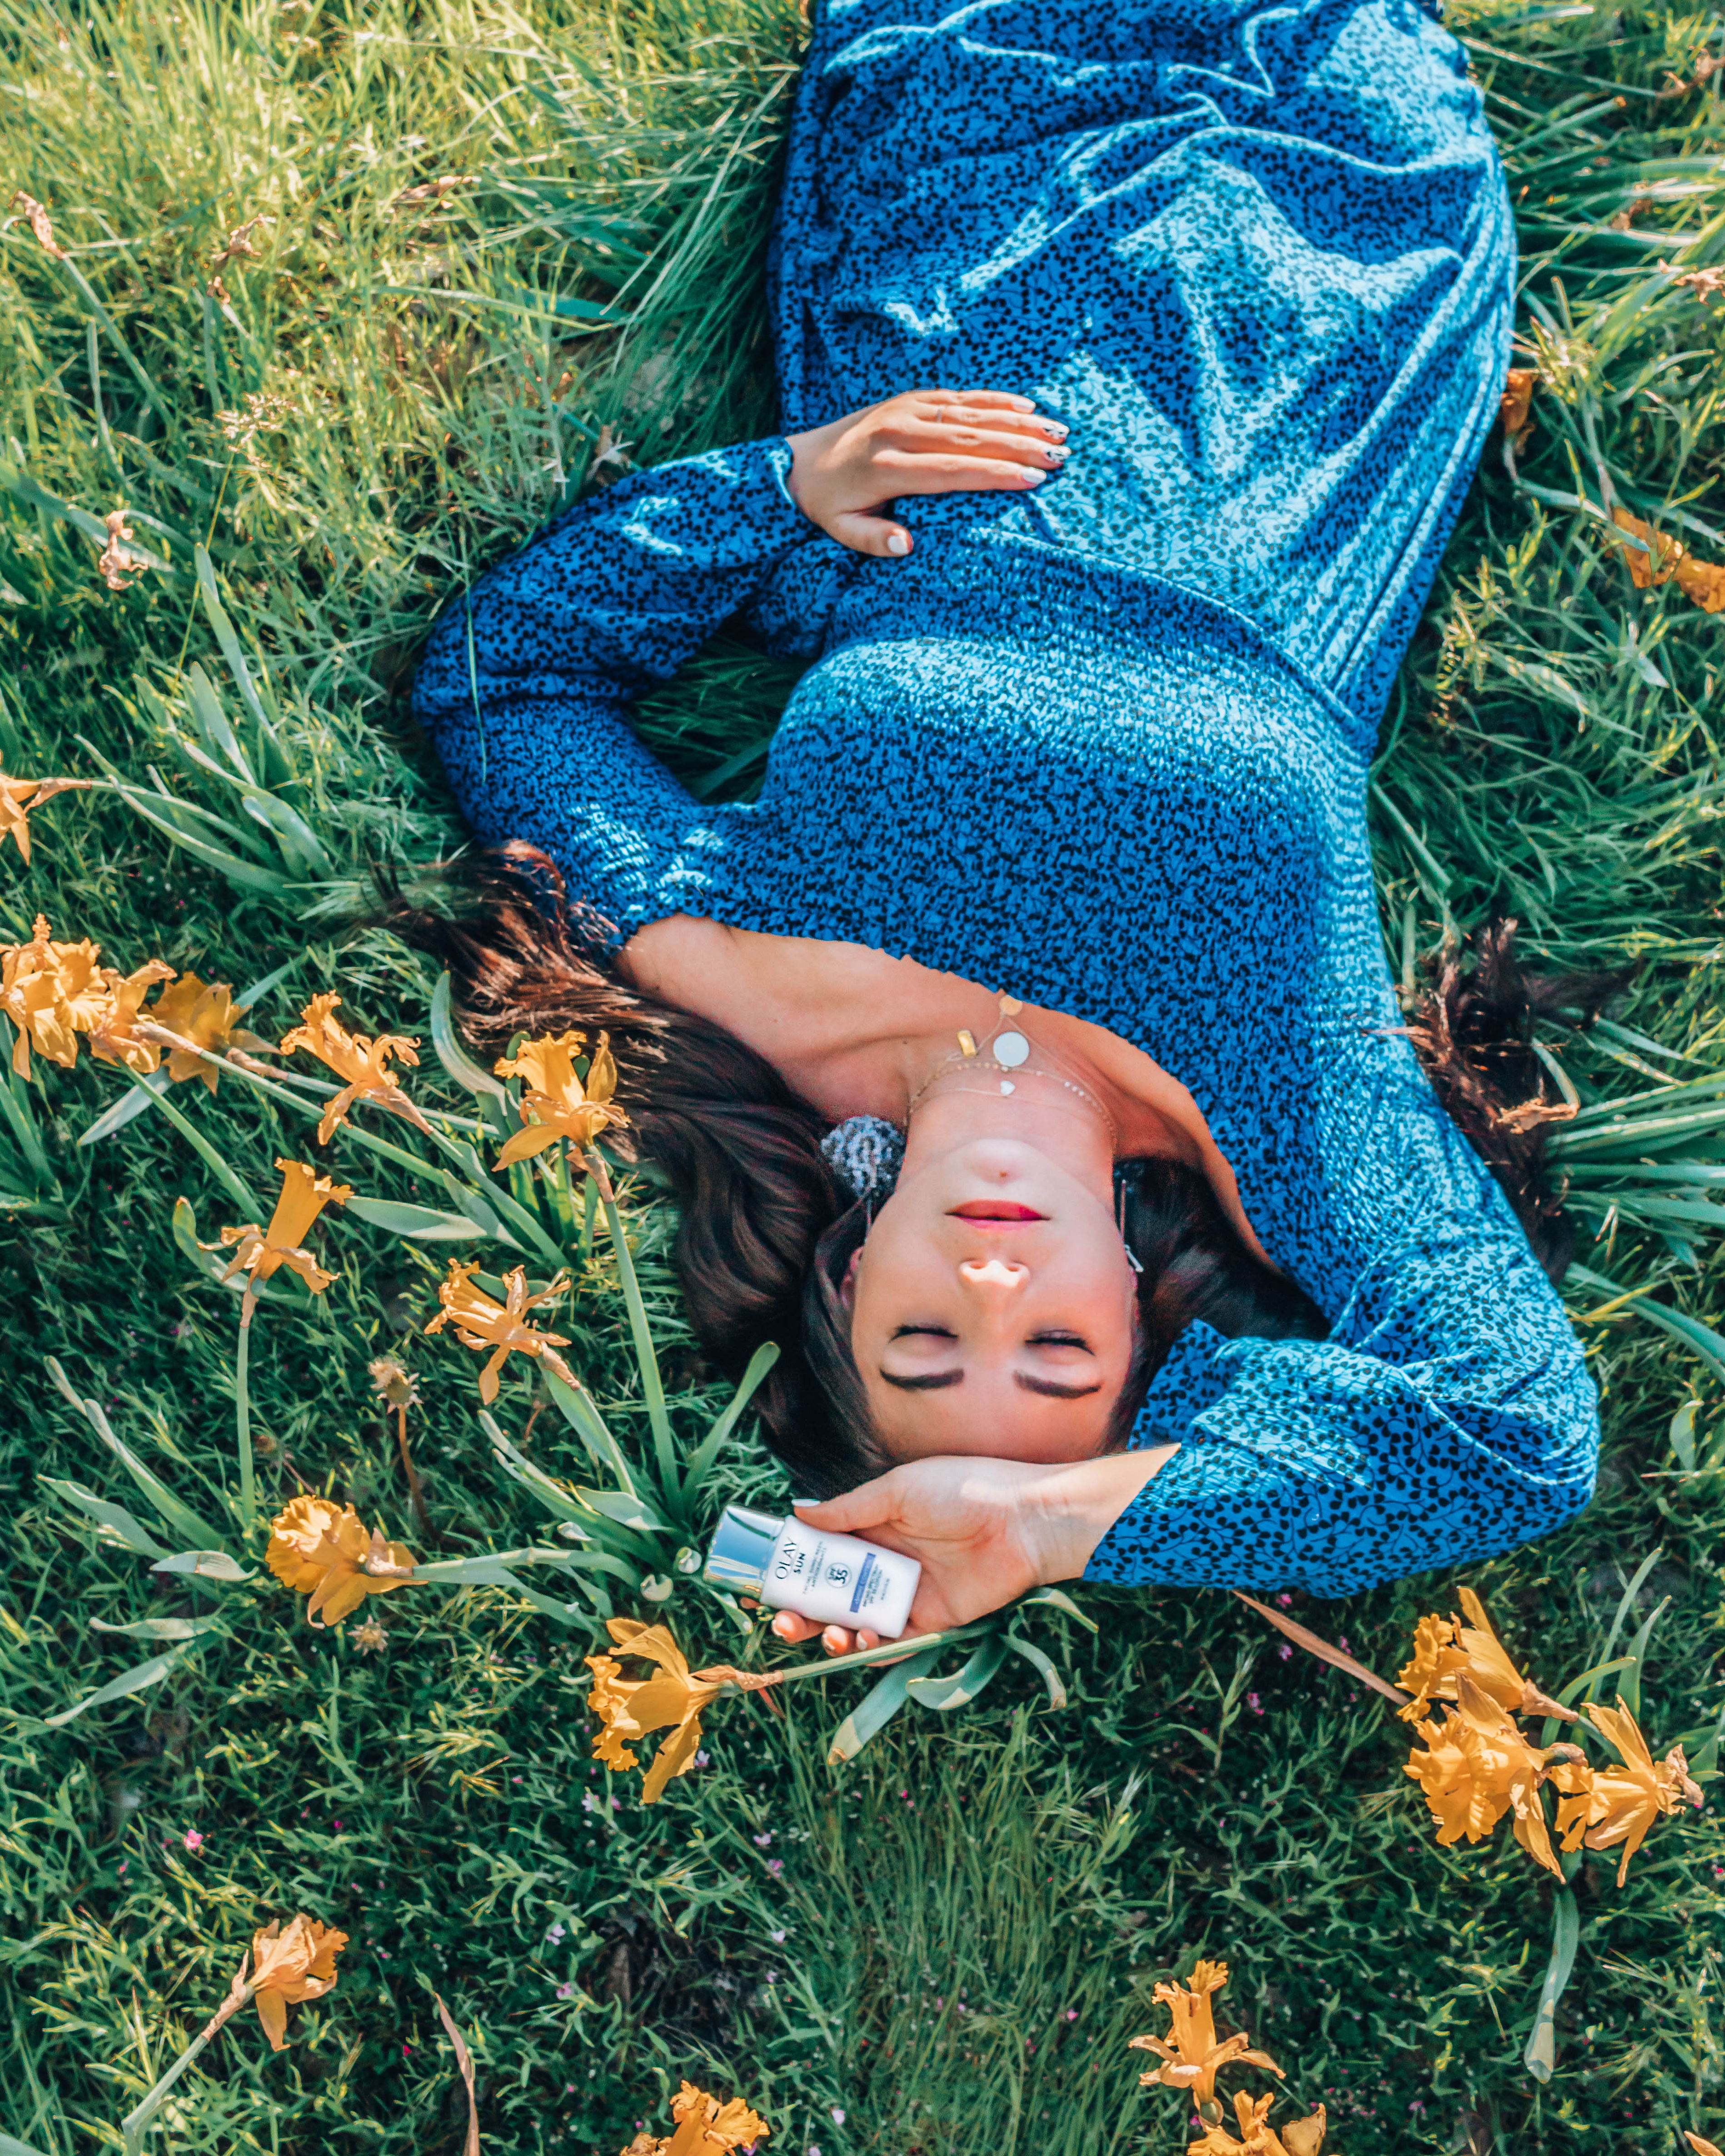 Woman in a blue dress and big earrings laying in a bed of daffodils.